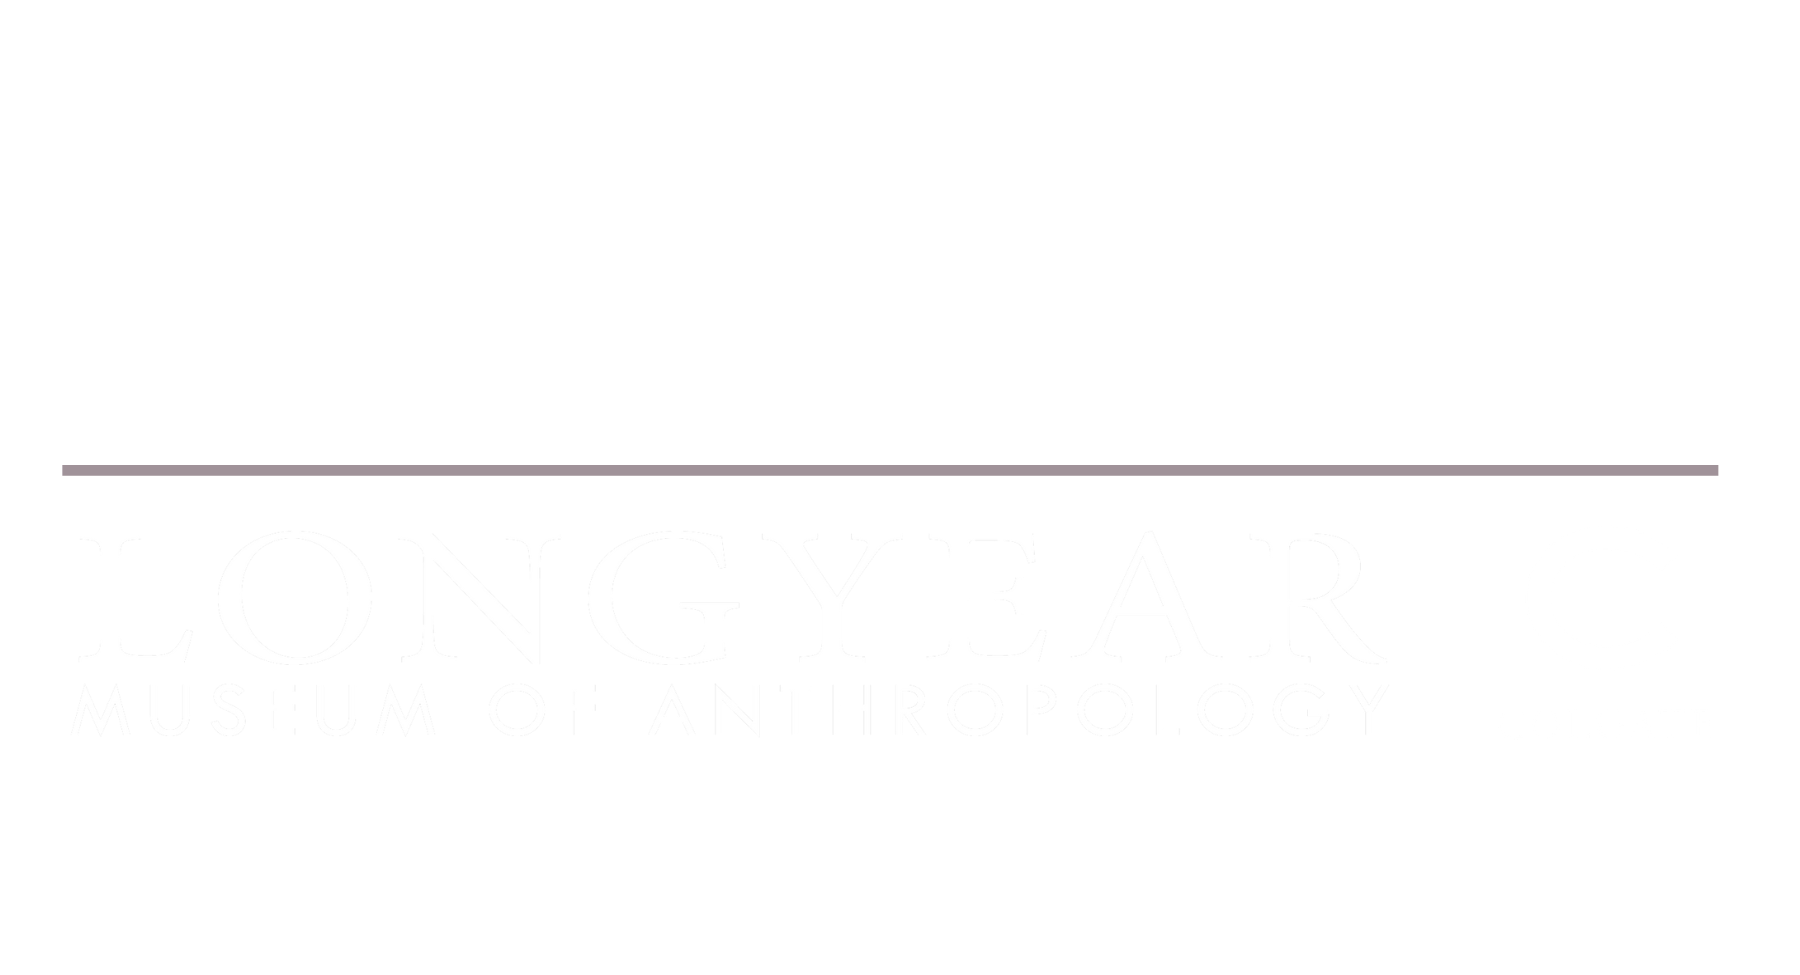 Makers and Materials of the Americas